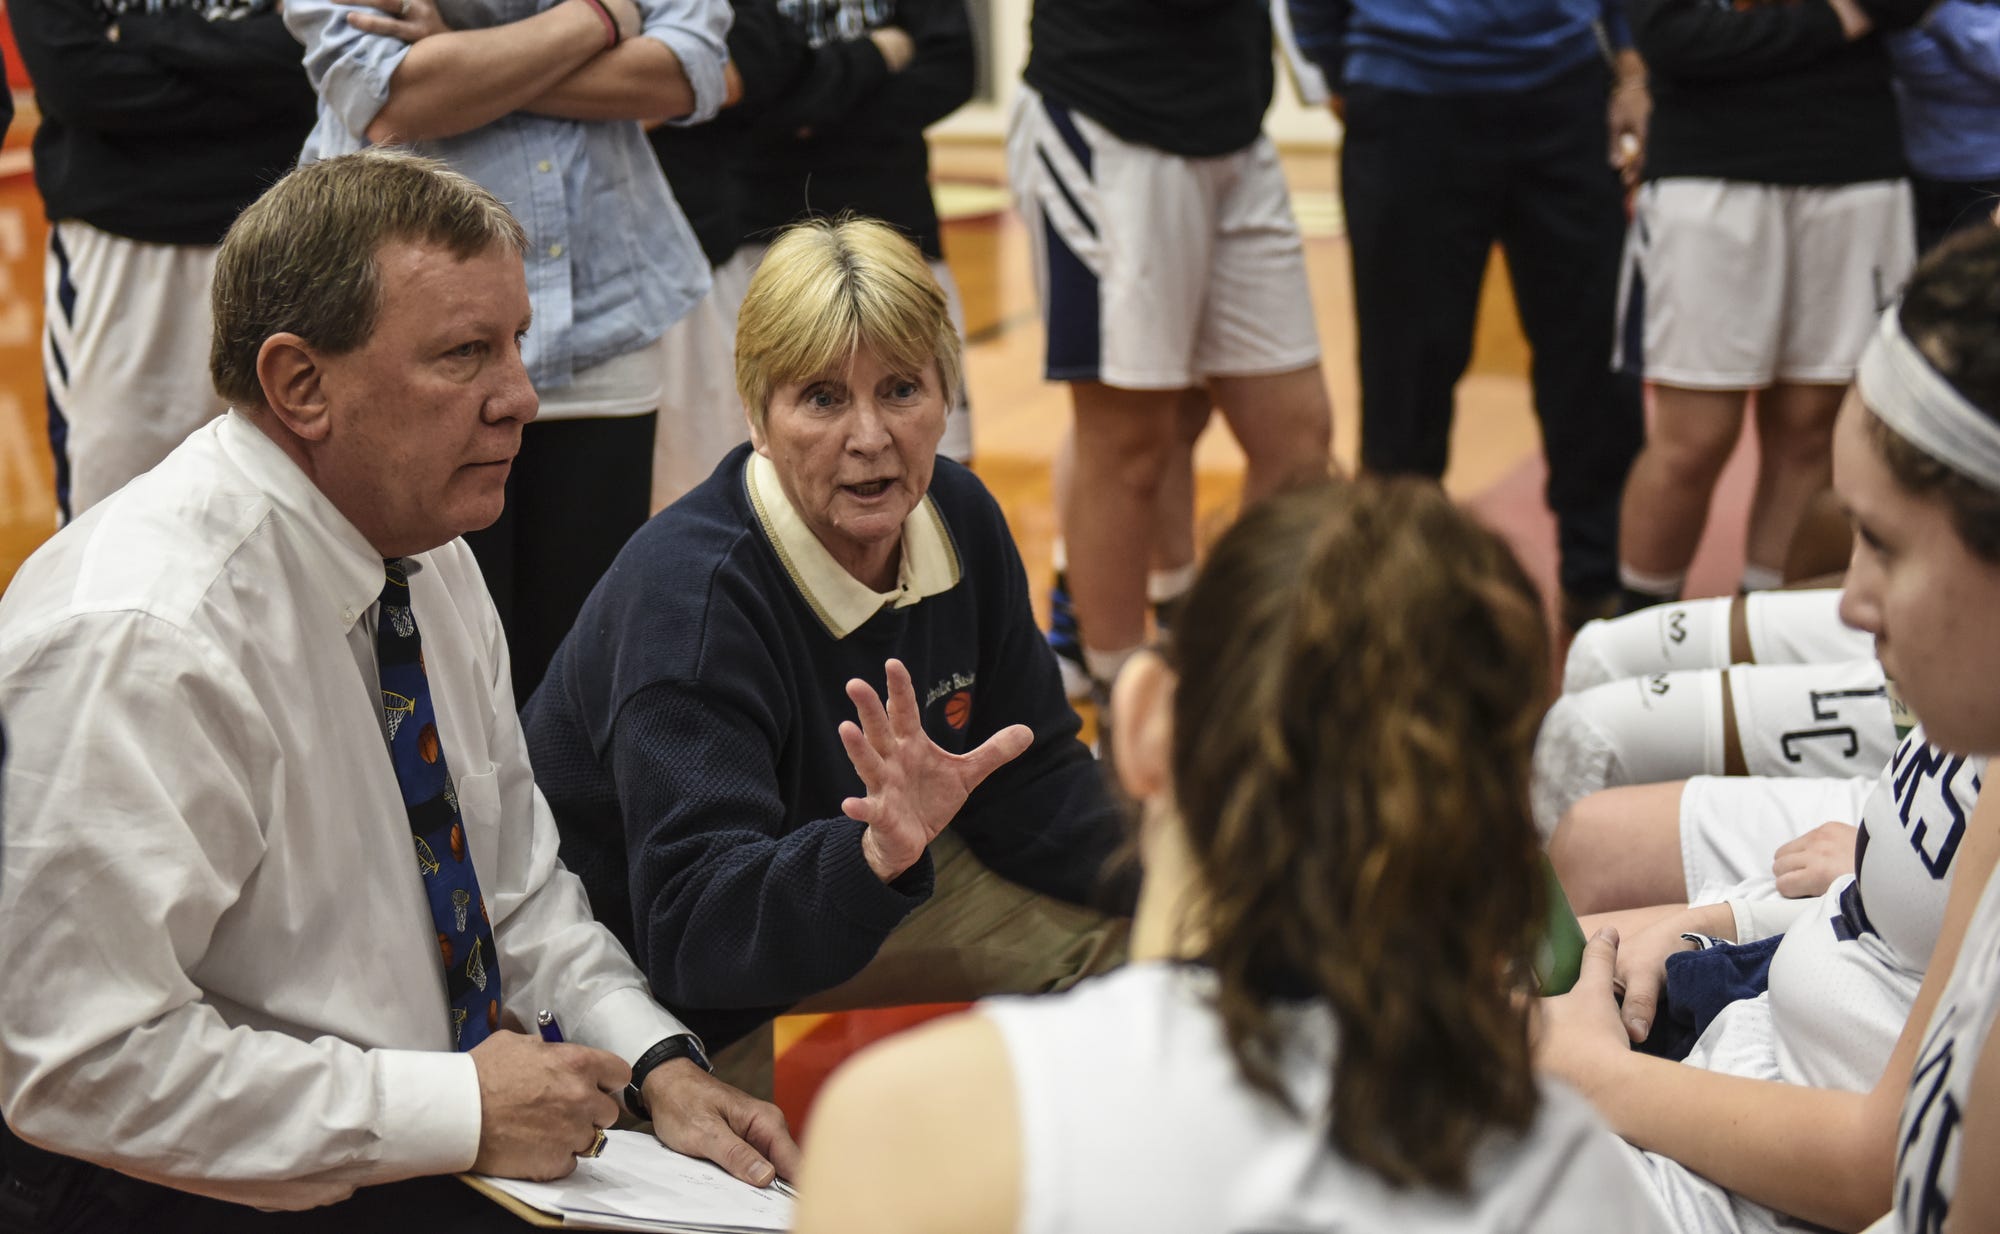 Lebanon Catholic head coach Patti Hower finishes her career with 756 victories